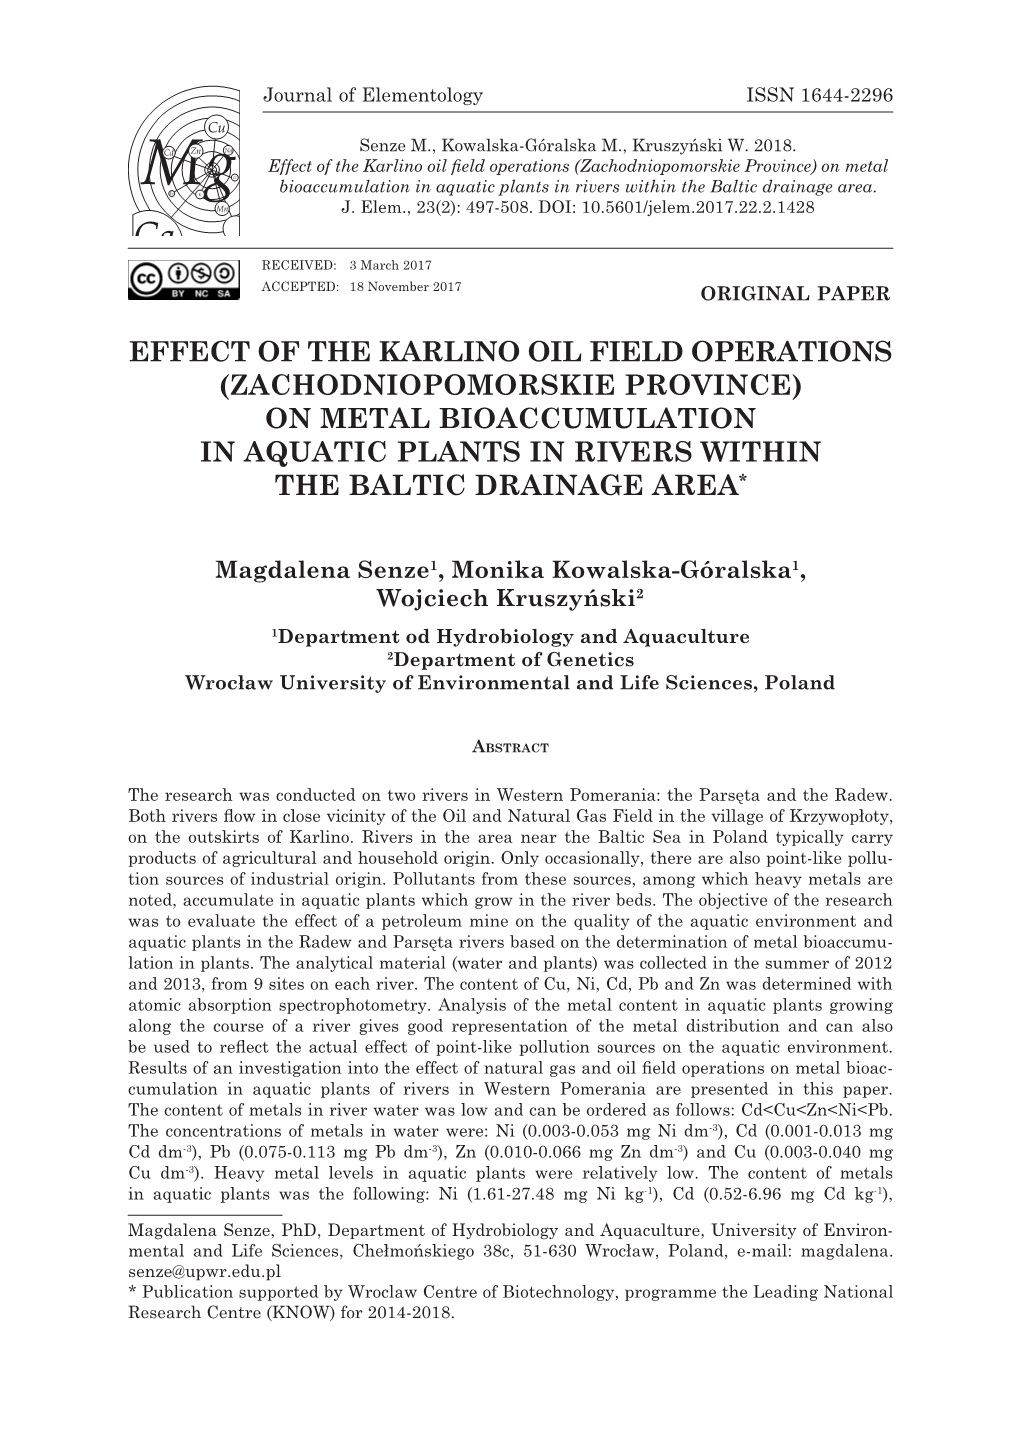 Effect of the Karlino Oil Field Operations (Zachodniopomorskie Province) on Metal Bioaccumulation in Aquatic Plants in Rivers Within the Baltic Drainage Area